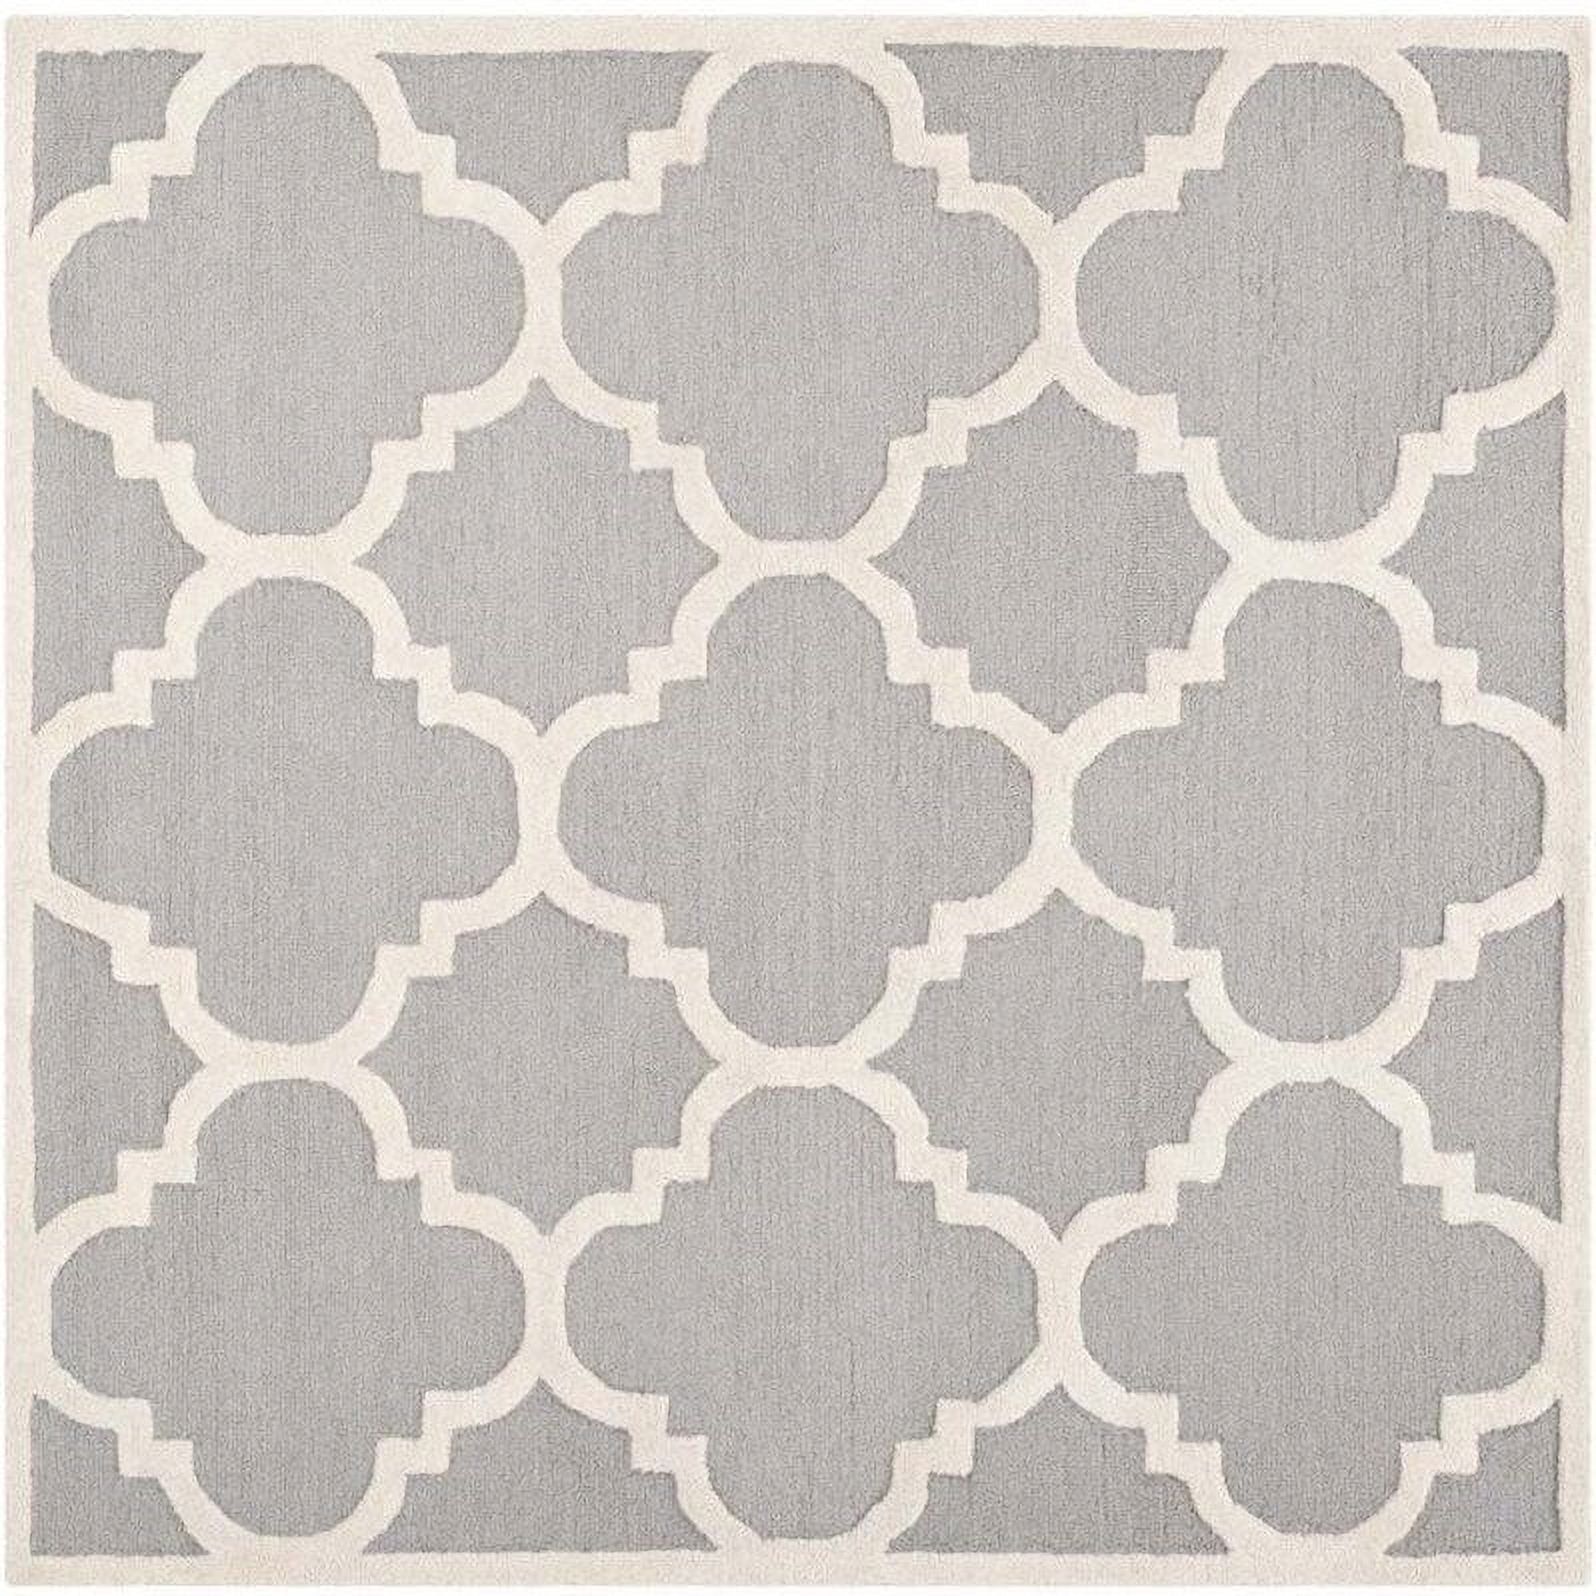 Silver and Ivory Geometric Hand-Tufted Wool Square Rug